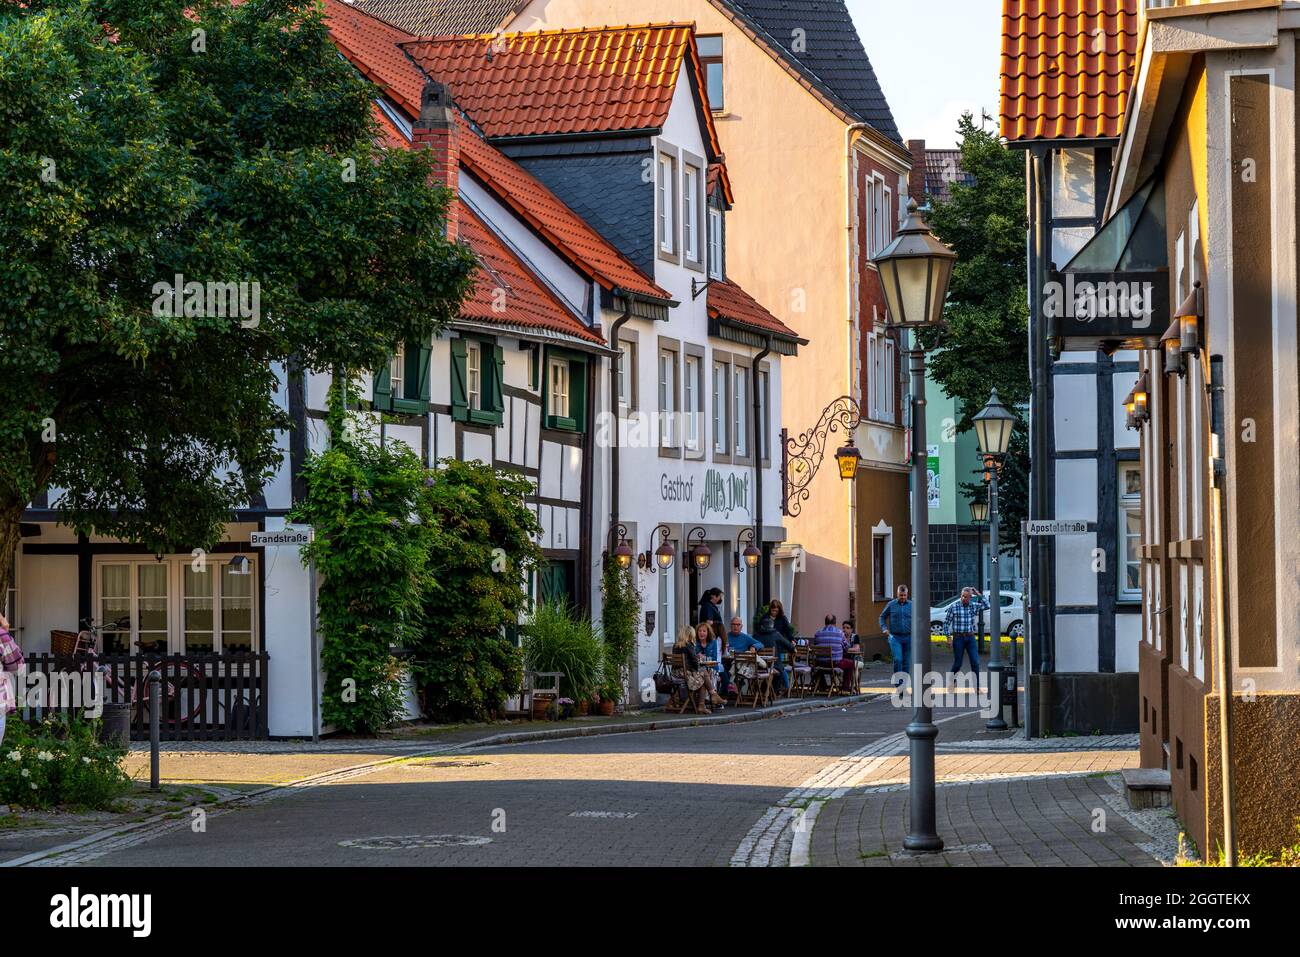 Old village Westerholt, listed district of Herten Westerholt, over 60 old, well renovated half-timbered houses form a historic village centre, Herten, Stock Photo